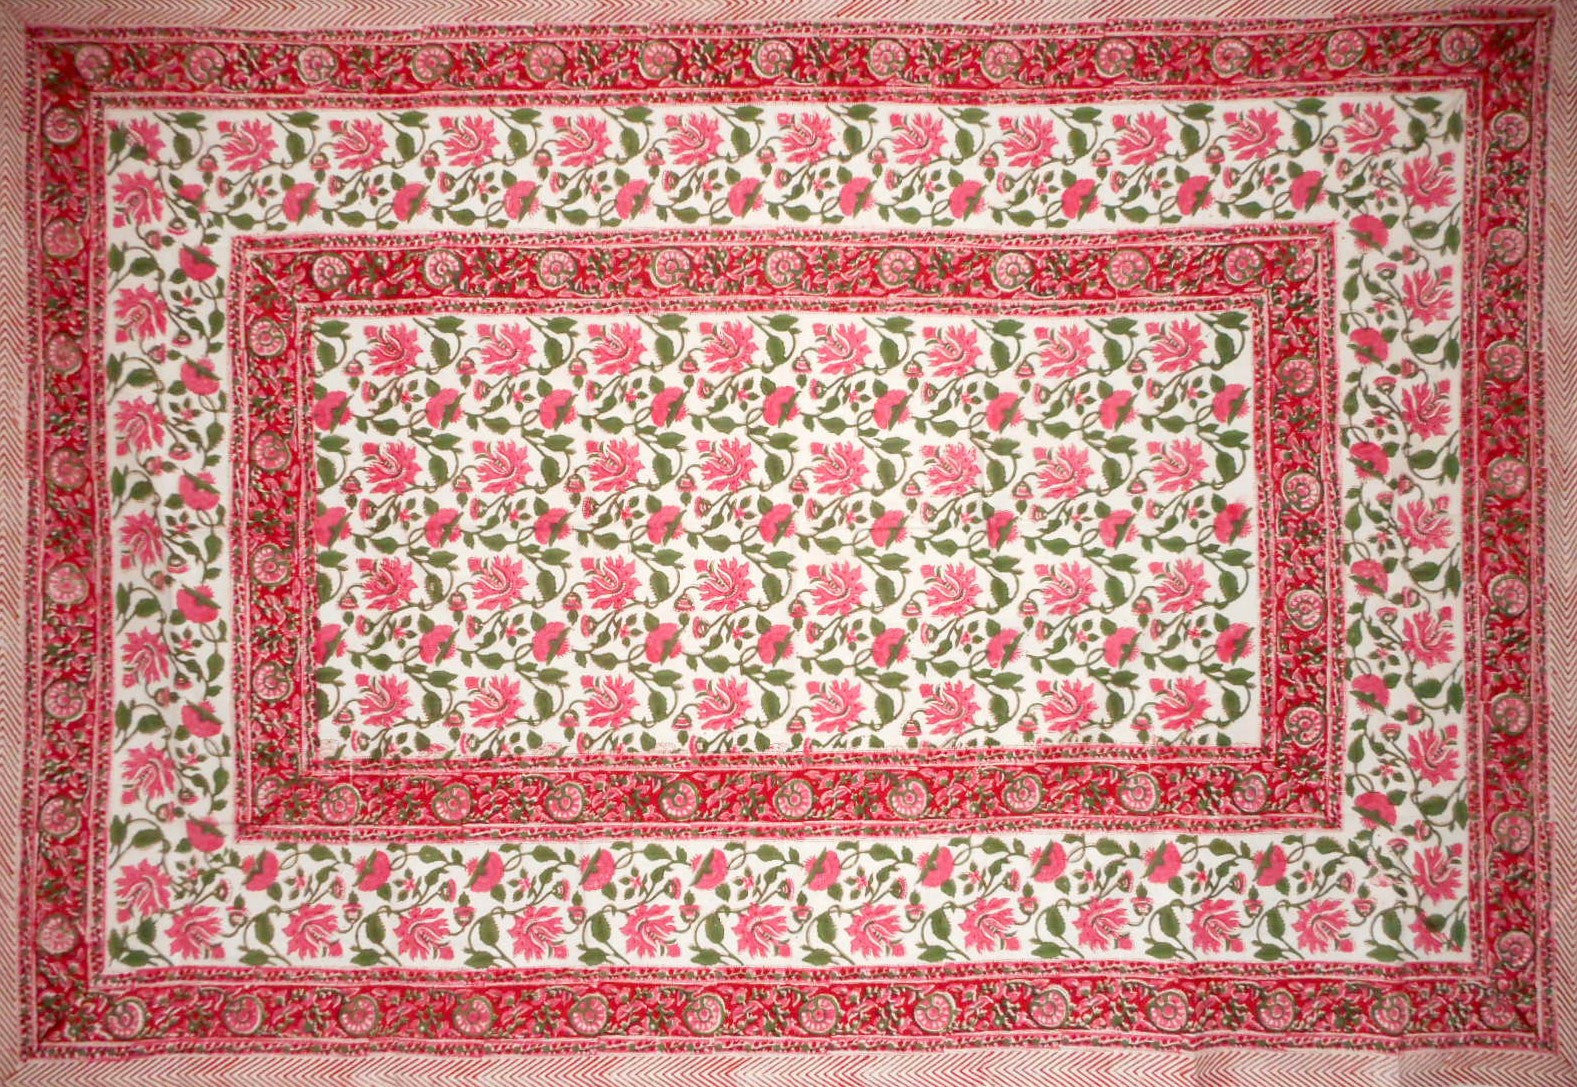 Pretty in Pink Block Print Cotton Tablecloth 90" x 60" Pink